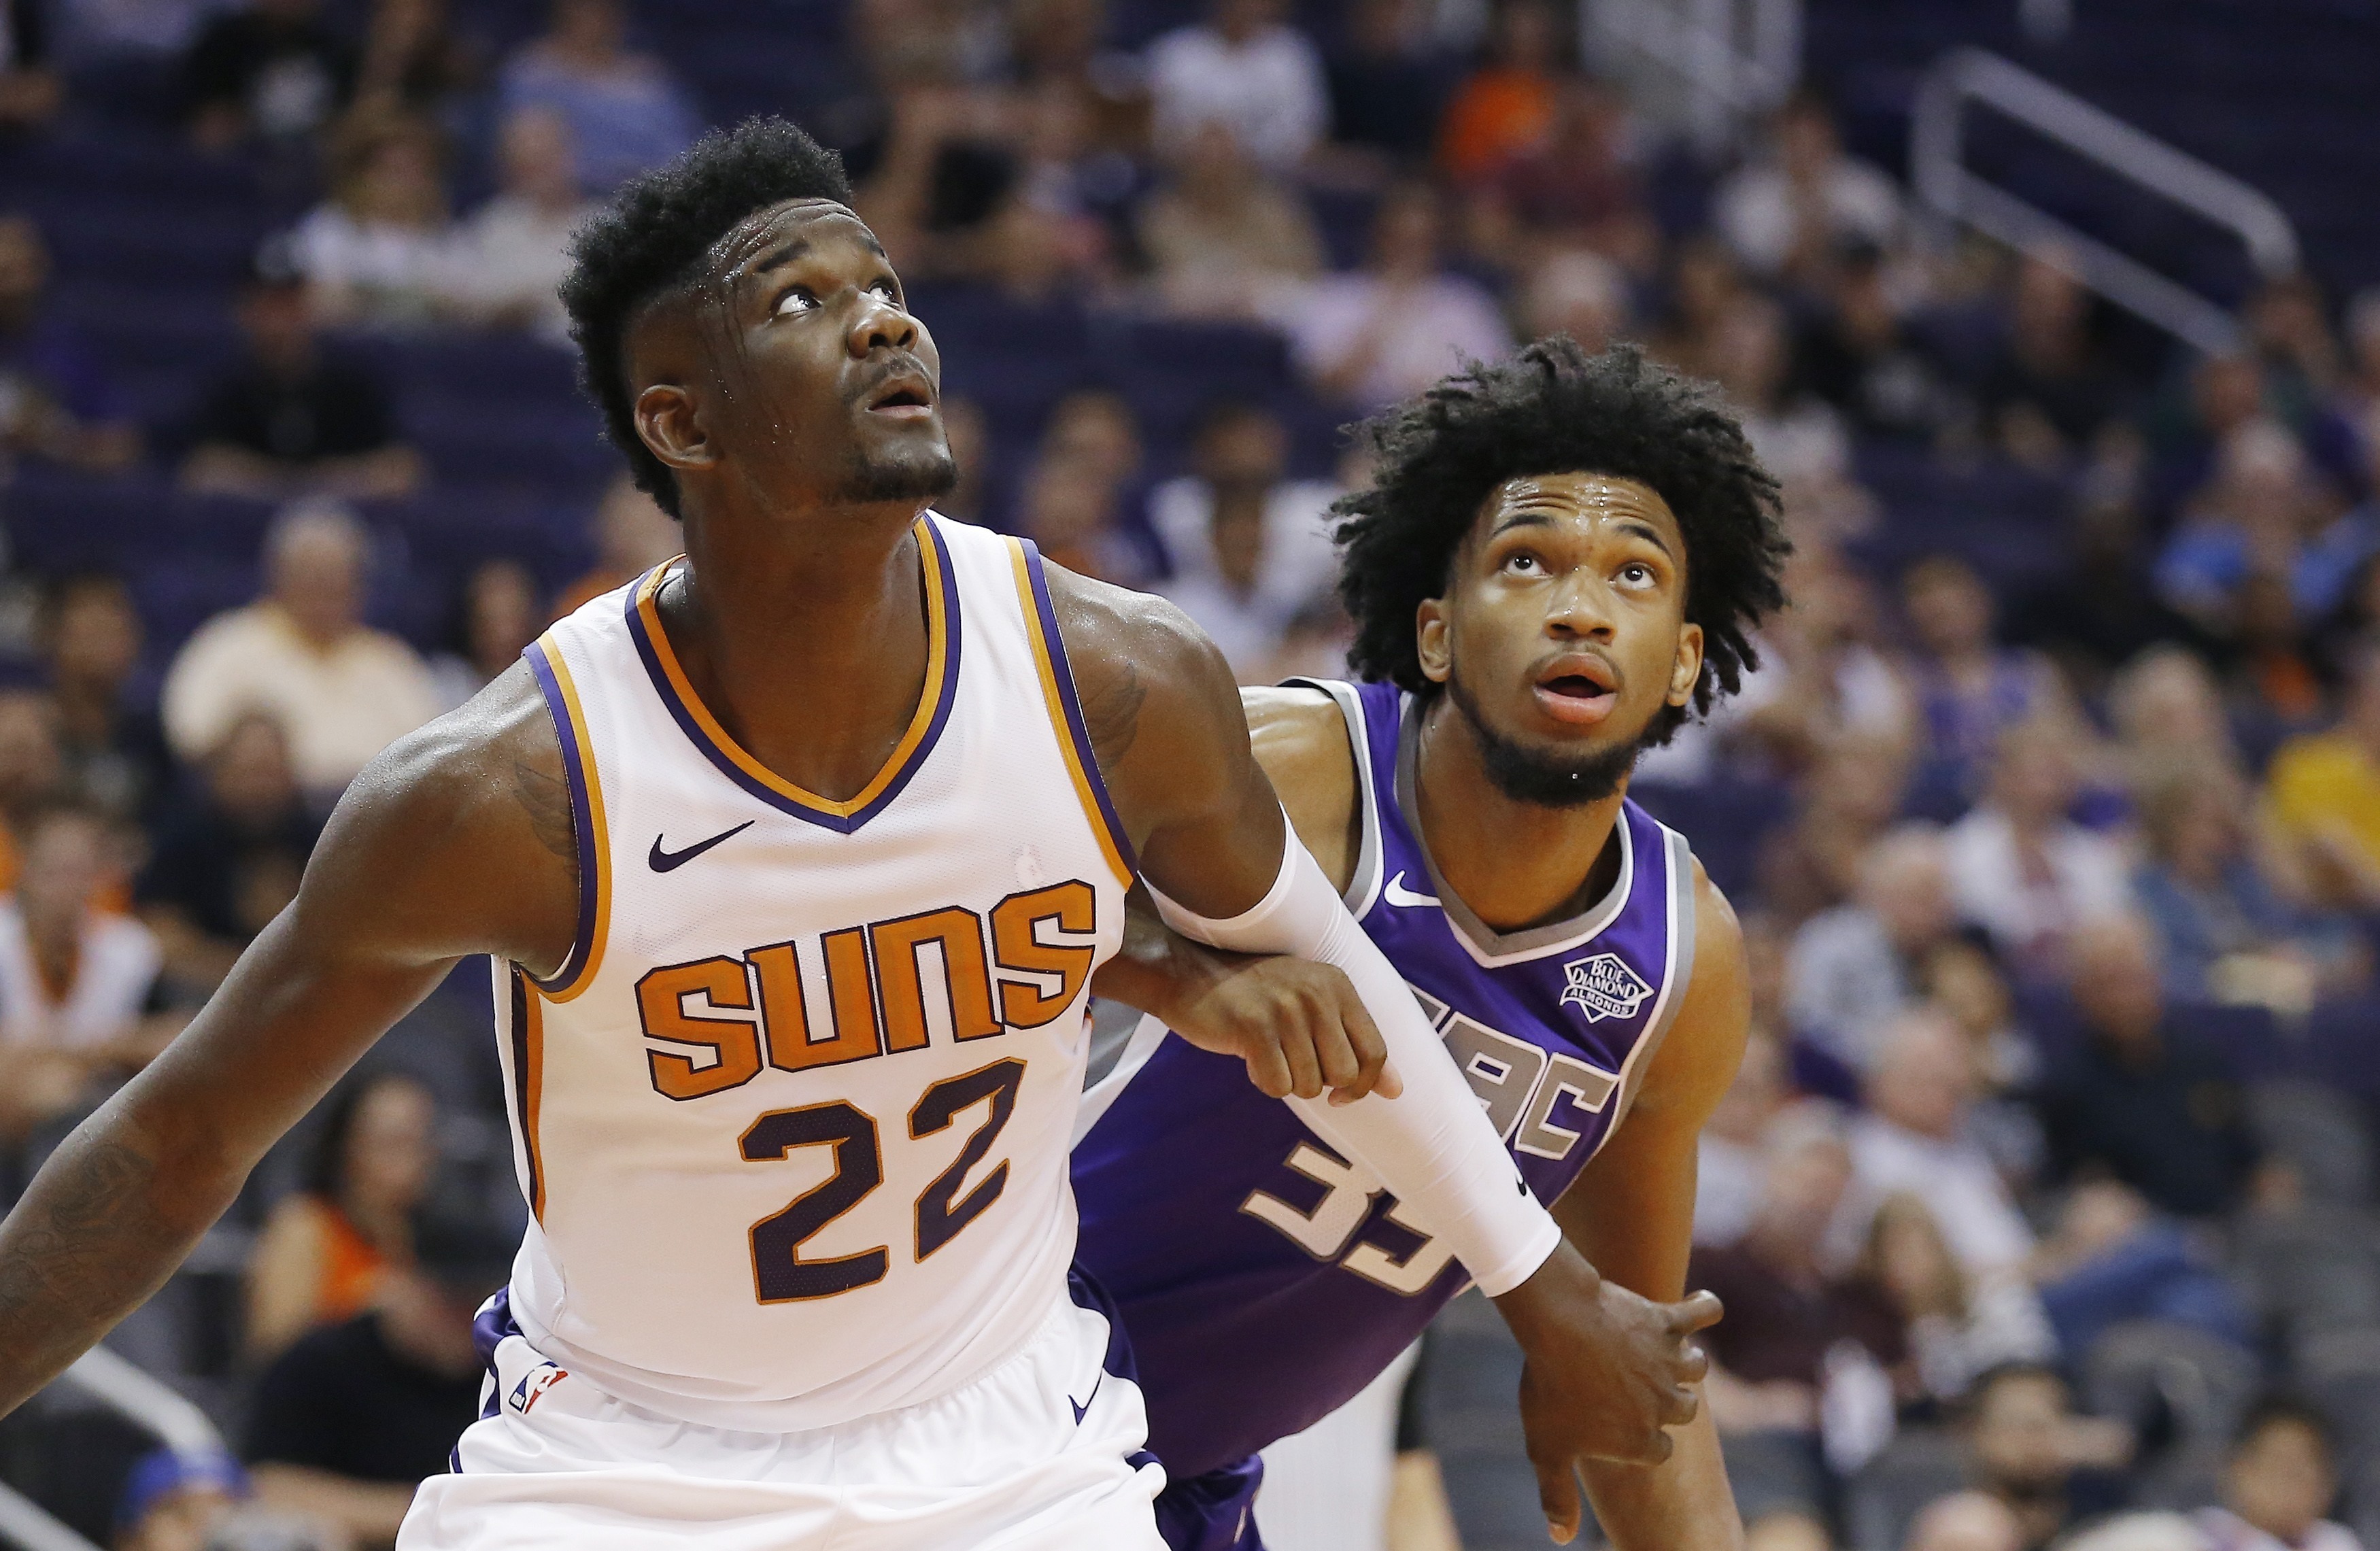 Dominant debut for No. 1 pick Ayton in Suns’ exhibition game